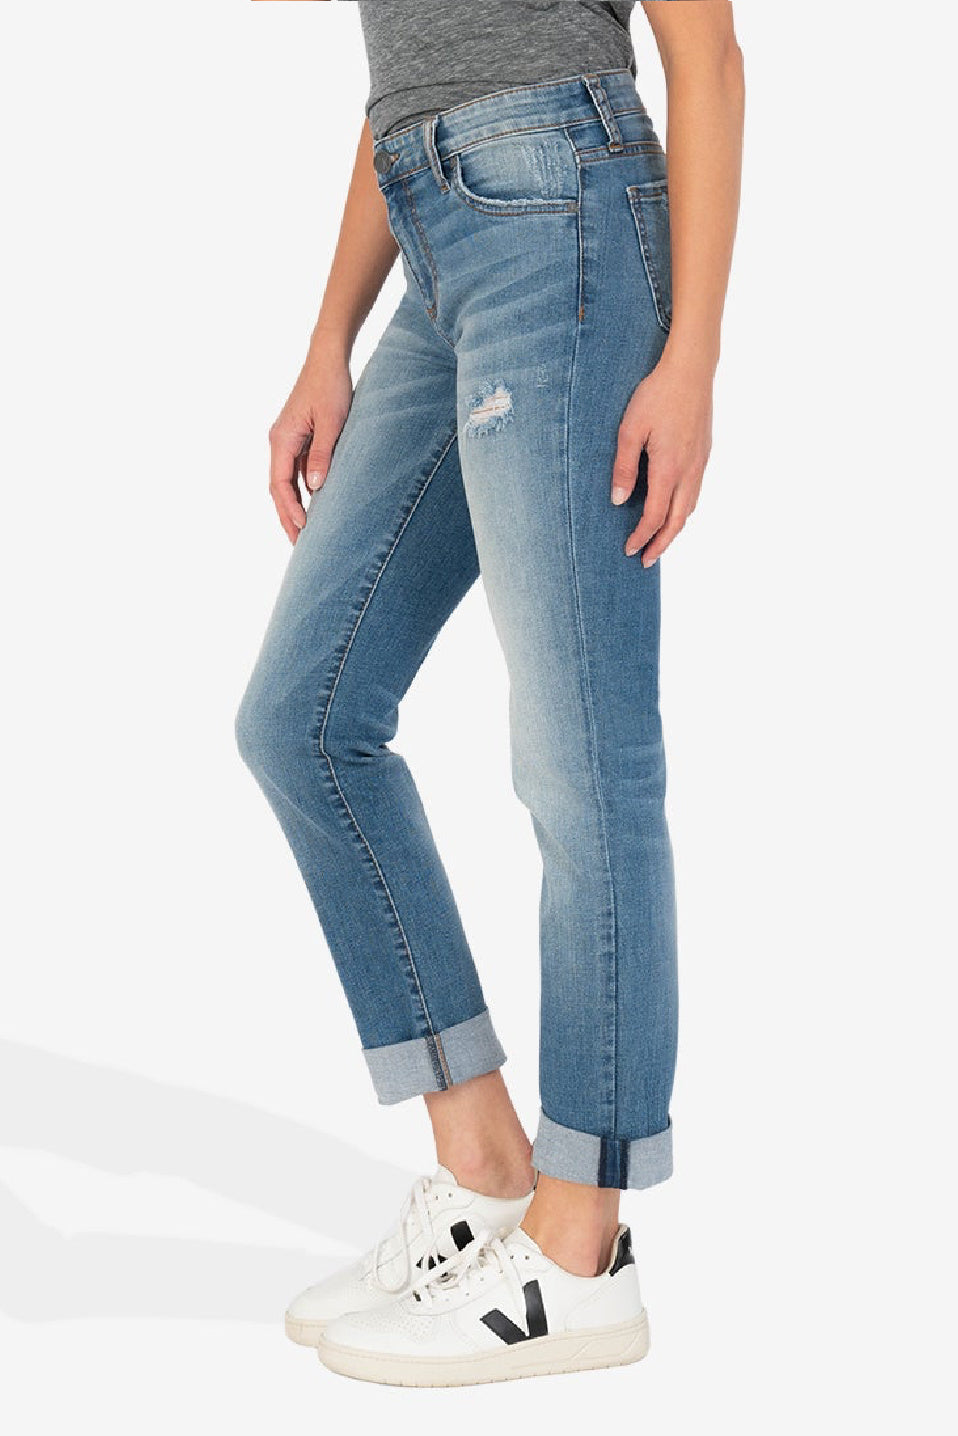 Kut From The Kloth Catherine Mid Rise Boyfriend Jeans (Voice Wash)